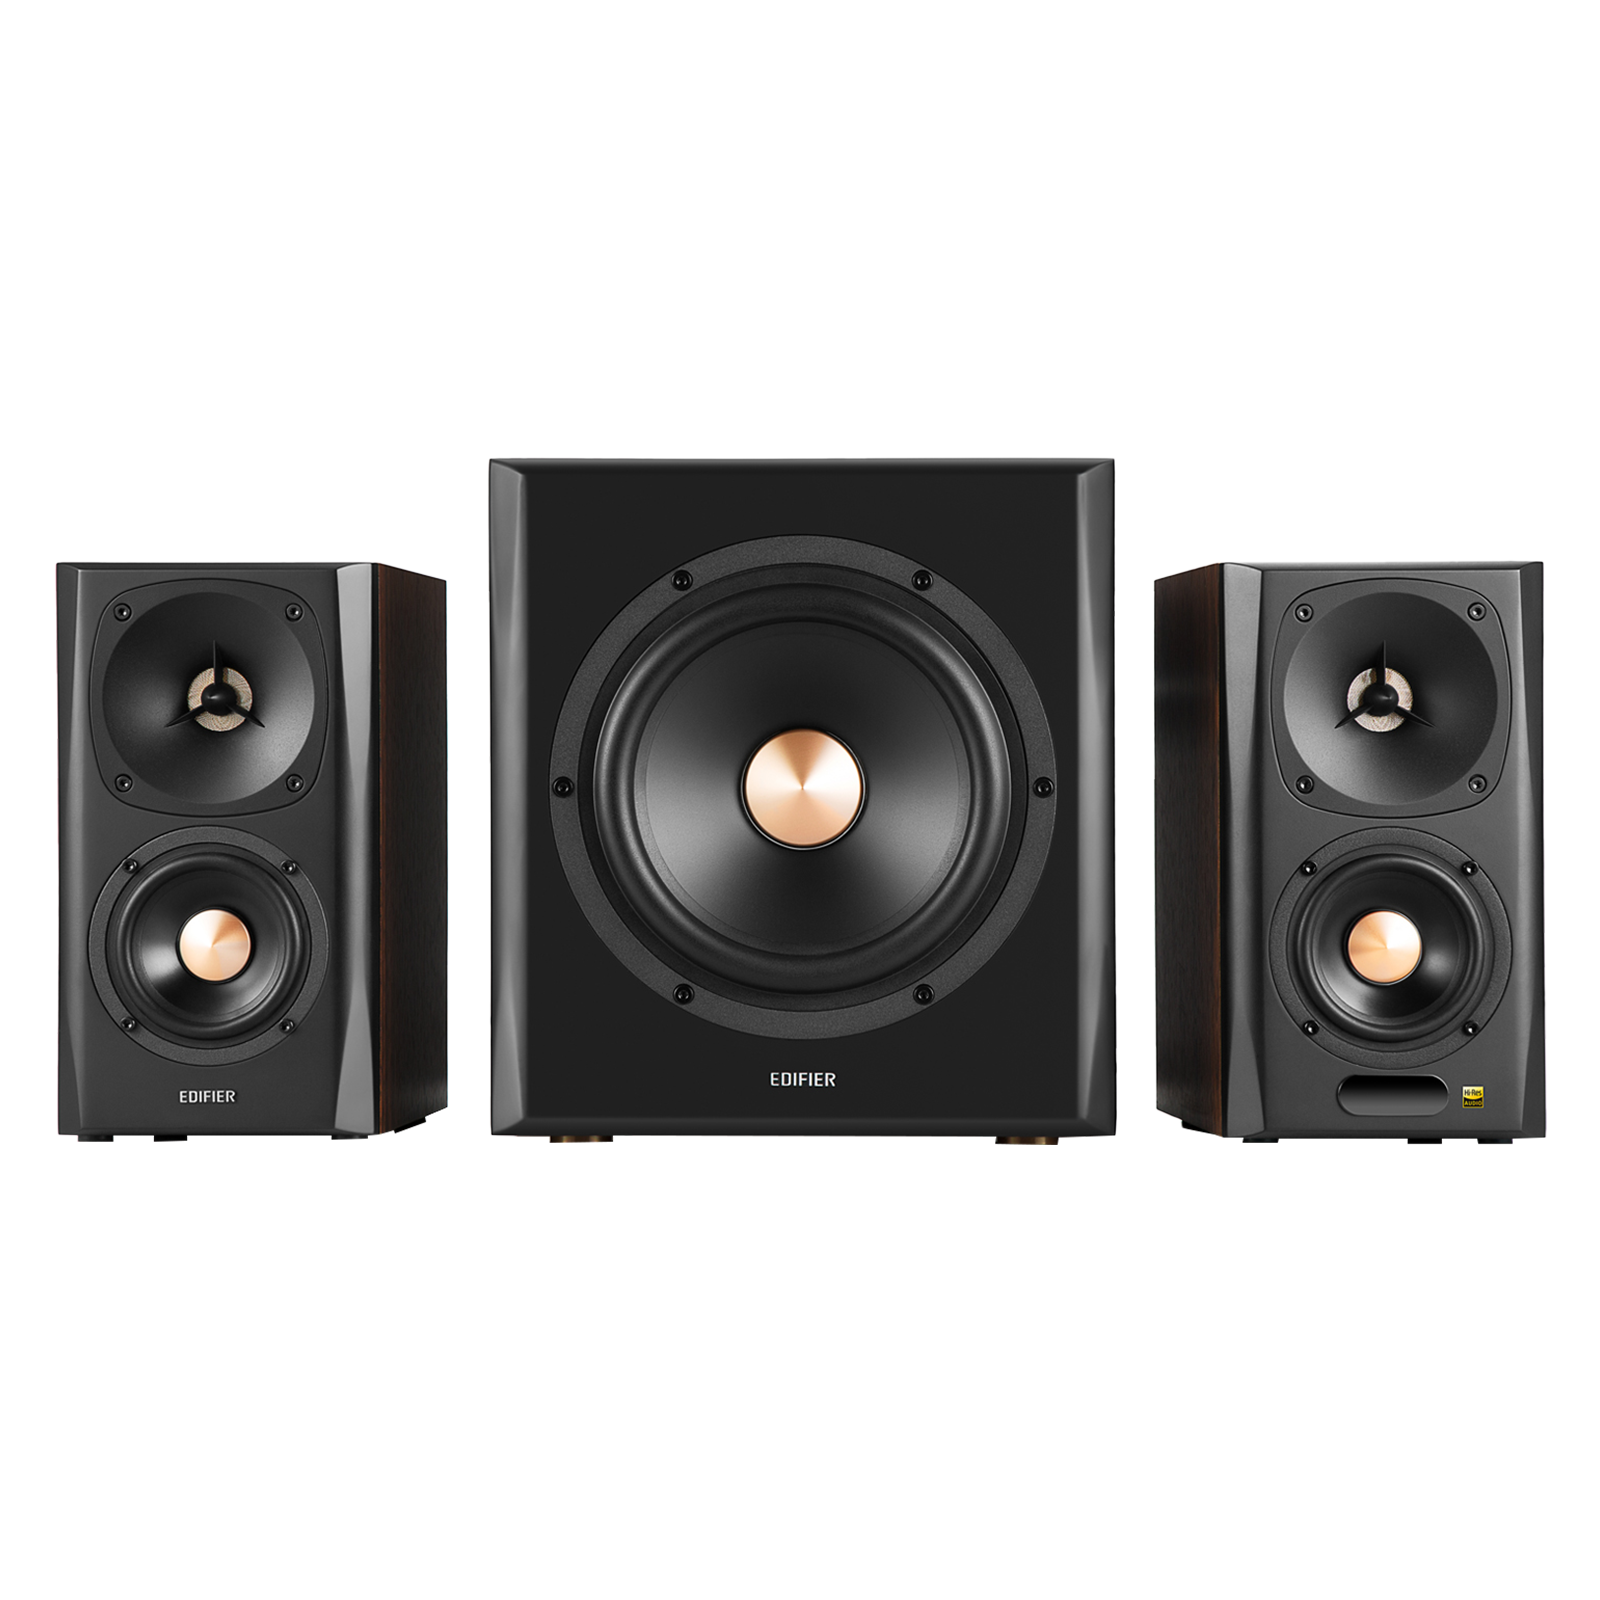 S360DB 2.1 Speakers Hi-Res Audio with wireless subwoofer (Certified Refurbished)